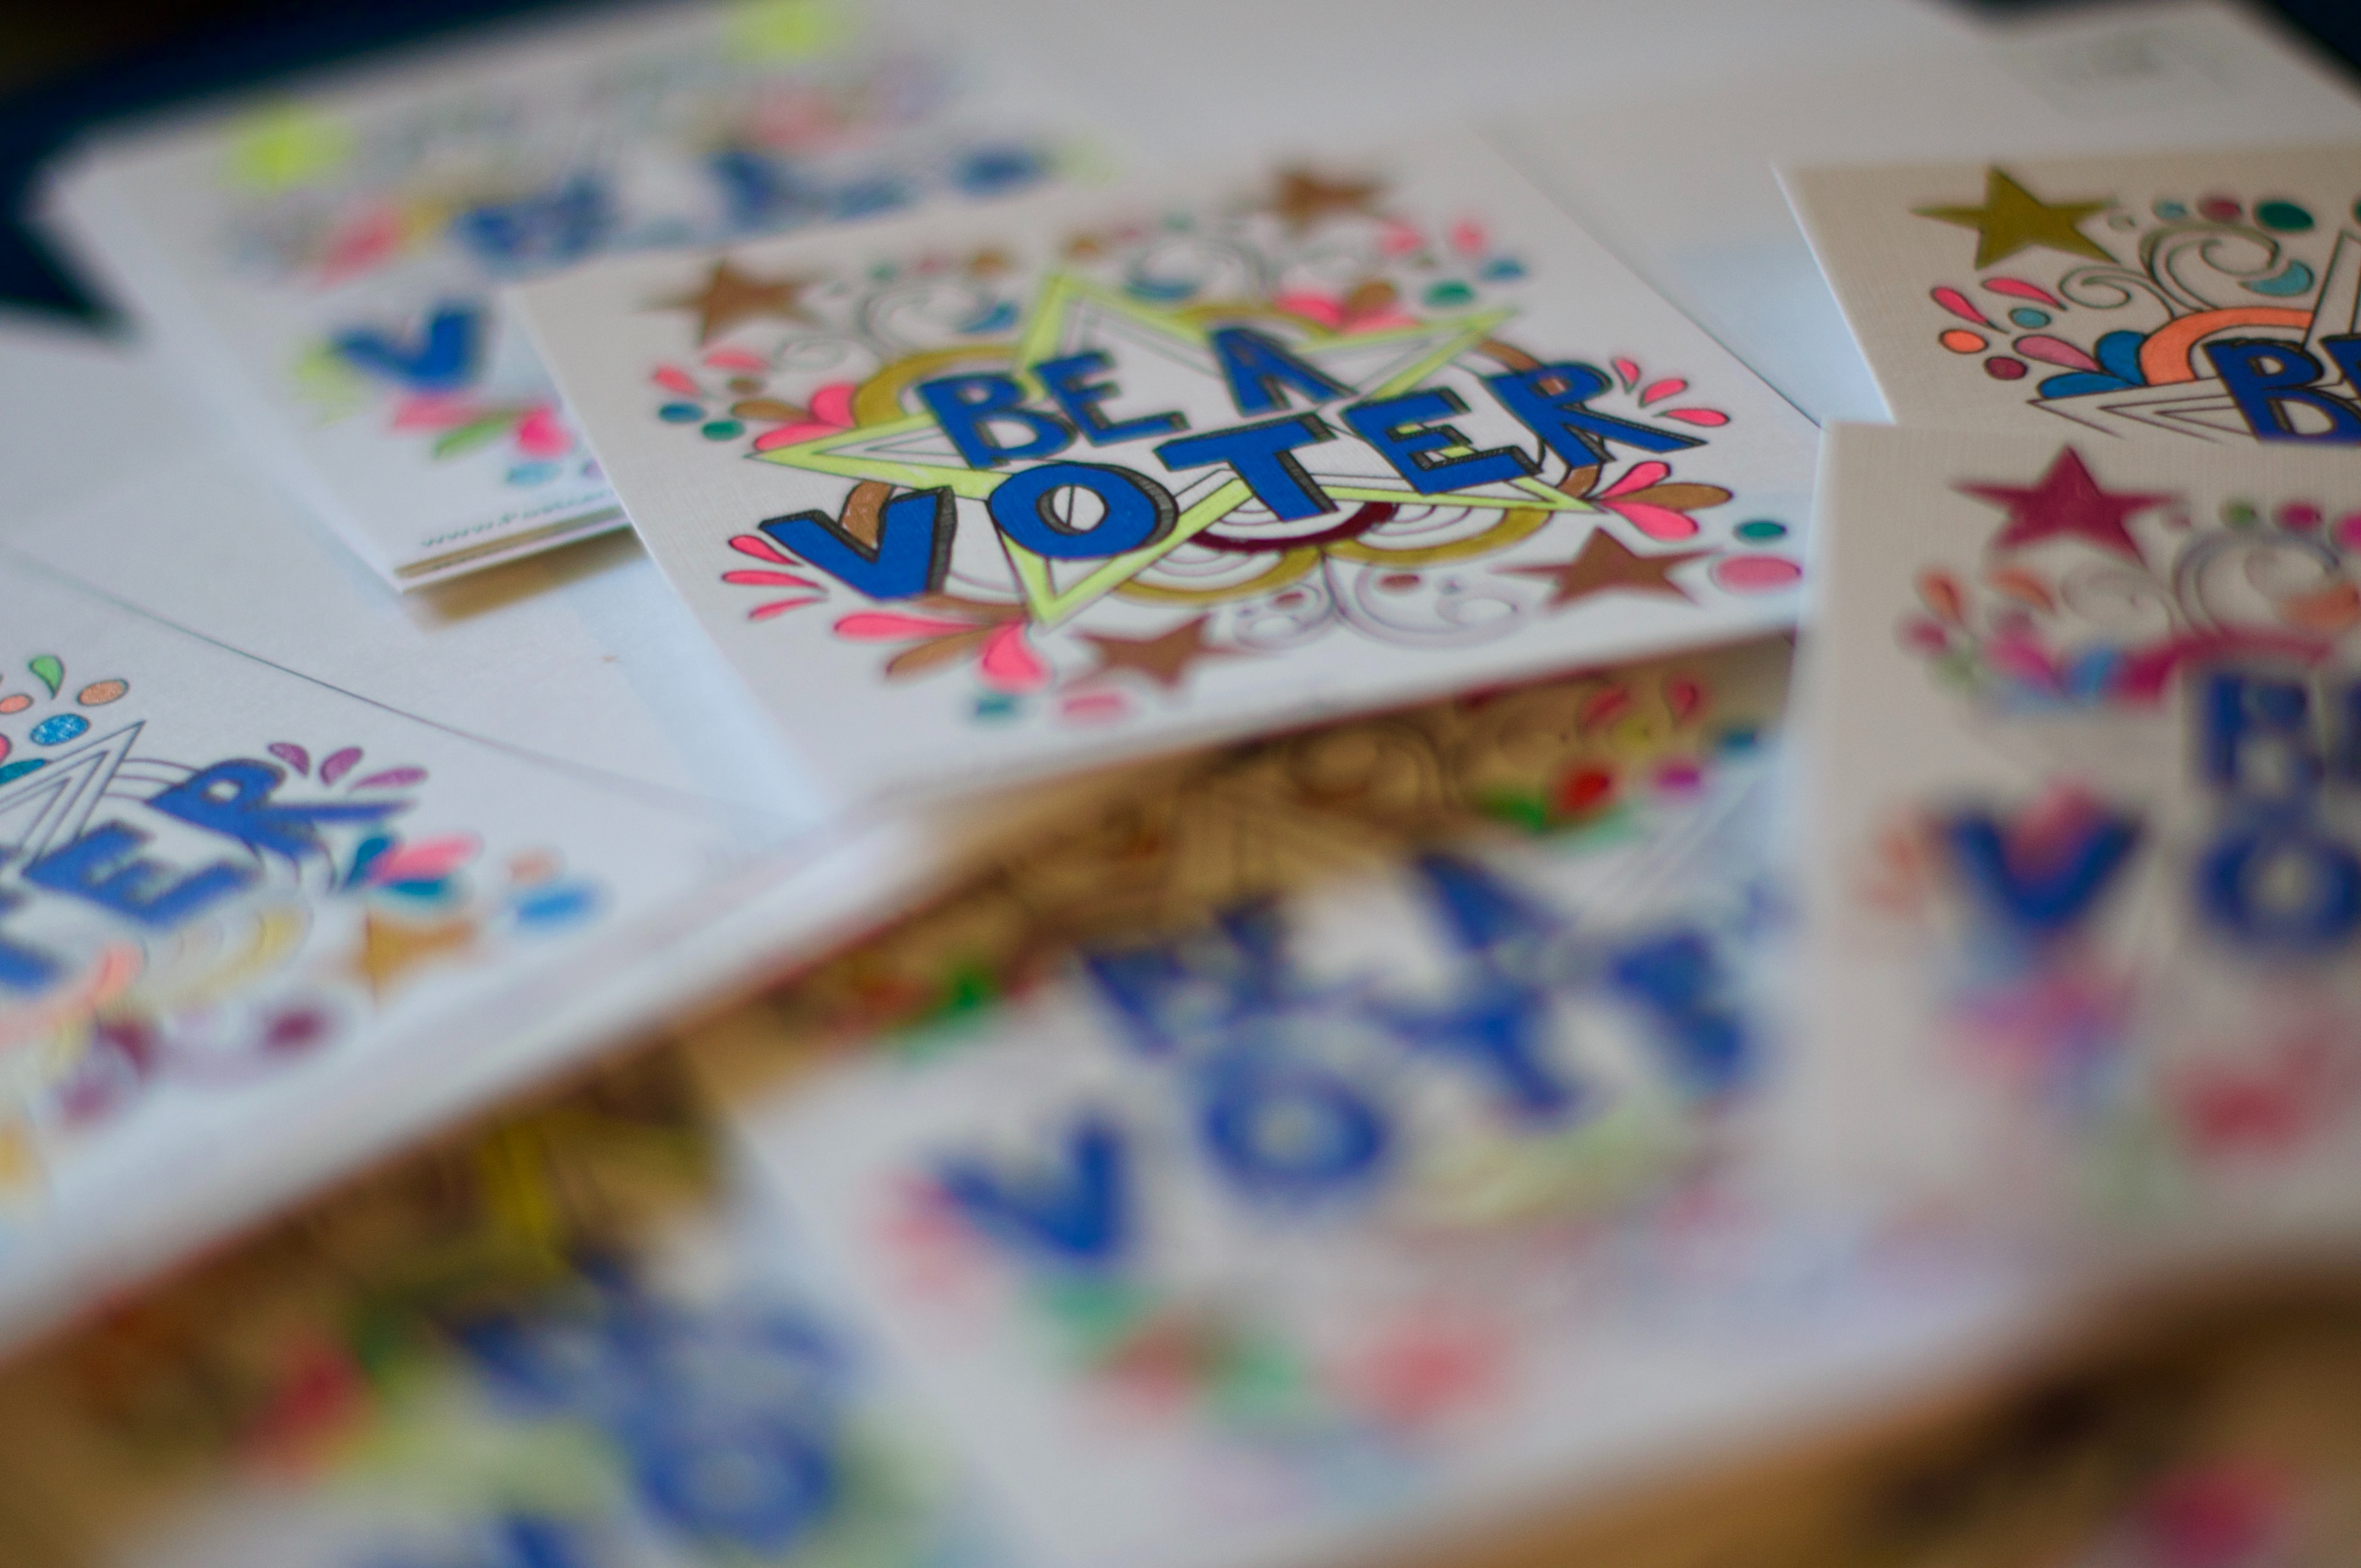 Cards that say "Be a voter"